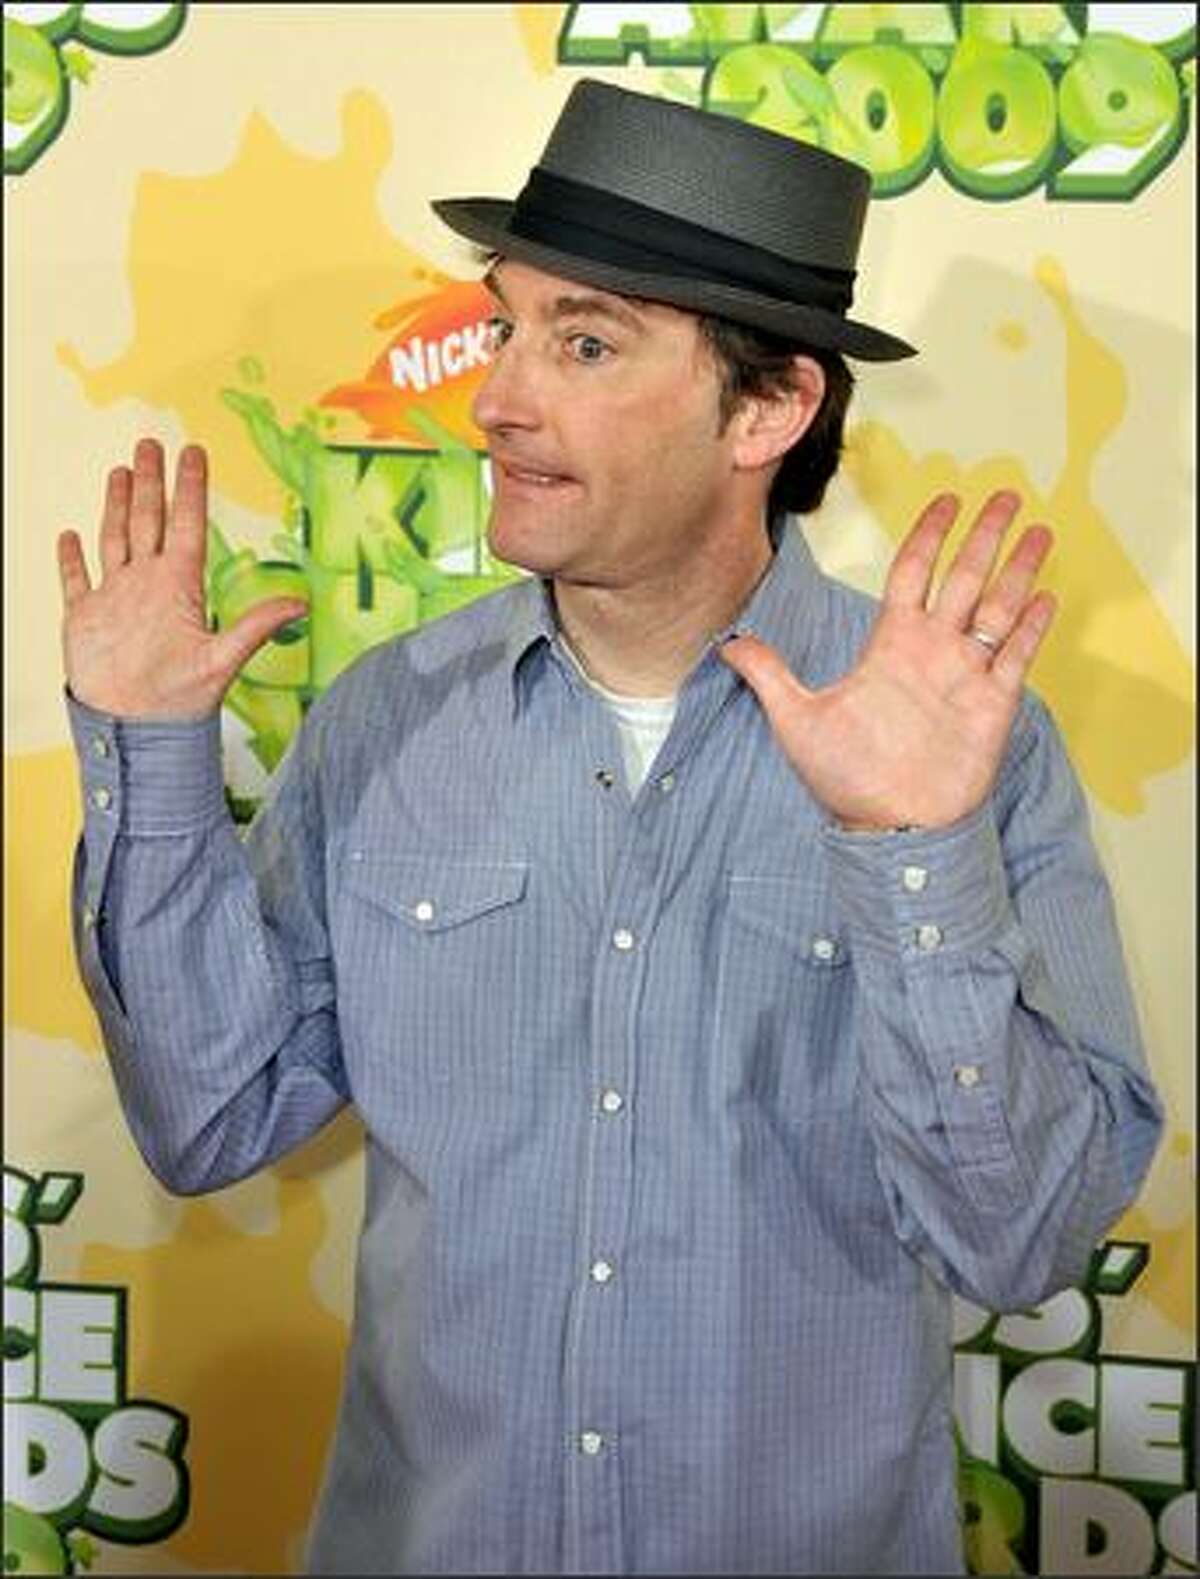 Actor Tom Kenny arrives at Nickelodeon's 2009 Kids' Choice Awards at UCLA's Pauley Pavilion in Westwood, Calif., on Saturday, March 28, 2009.